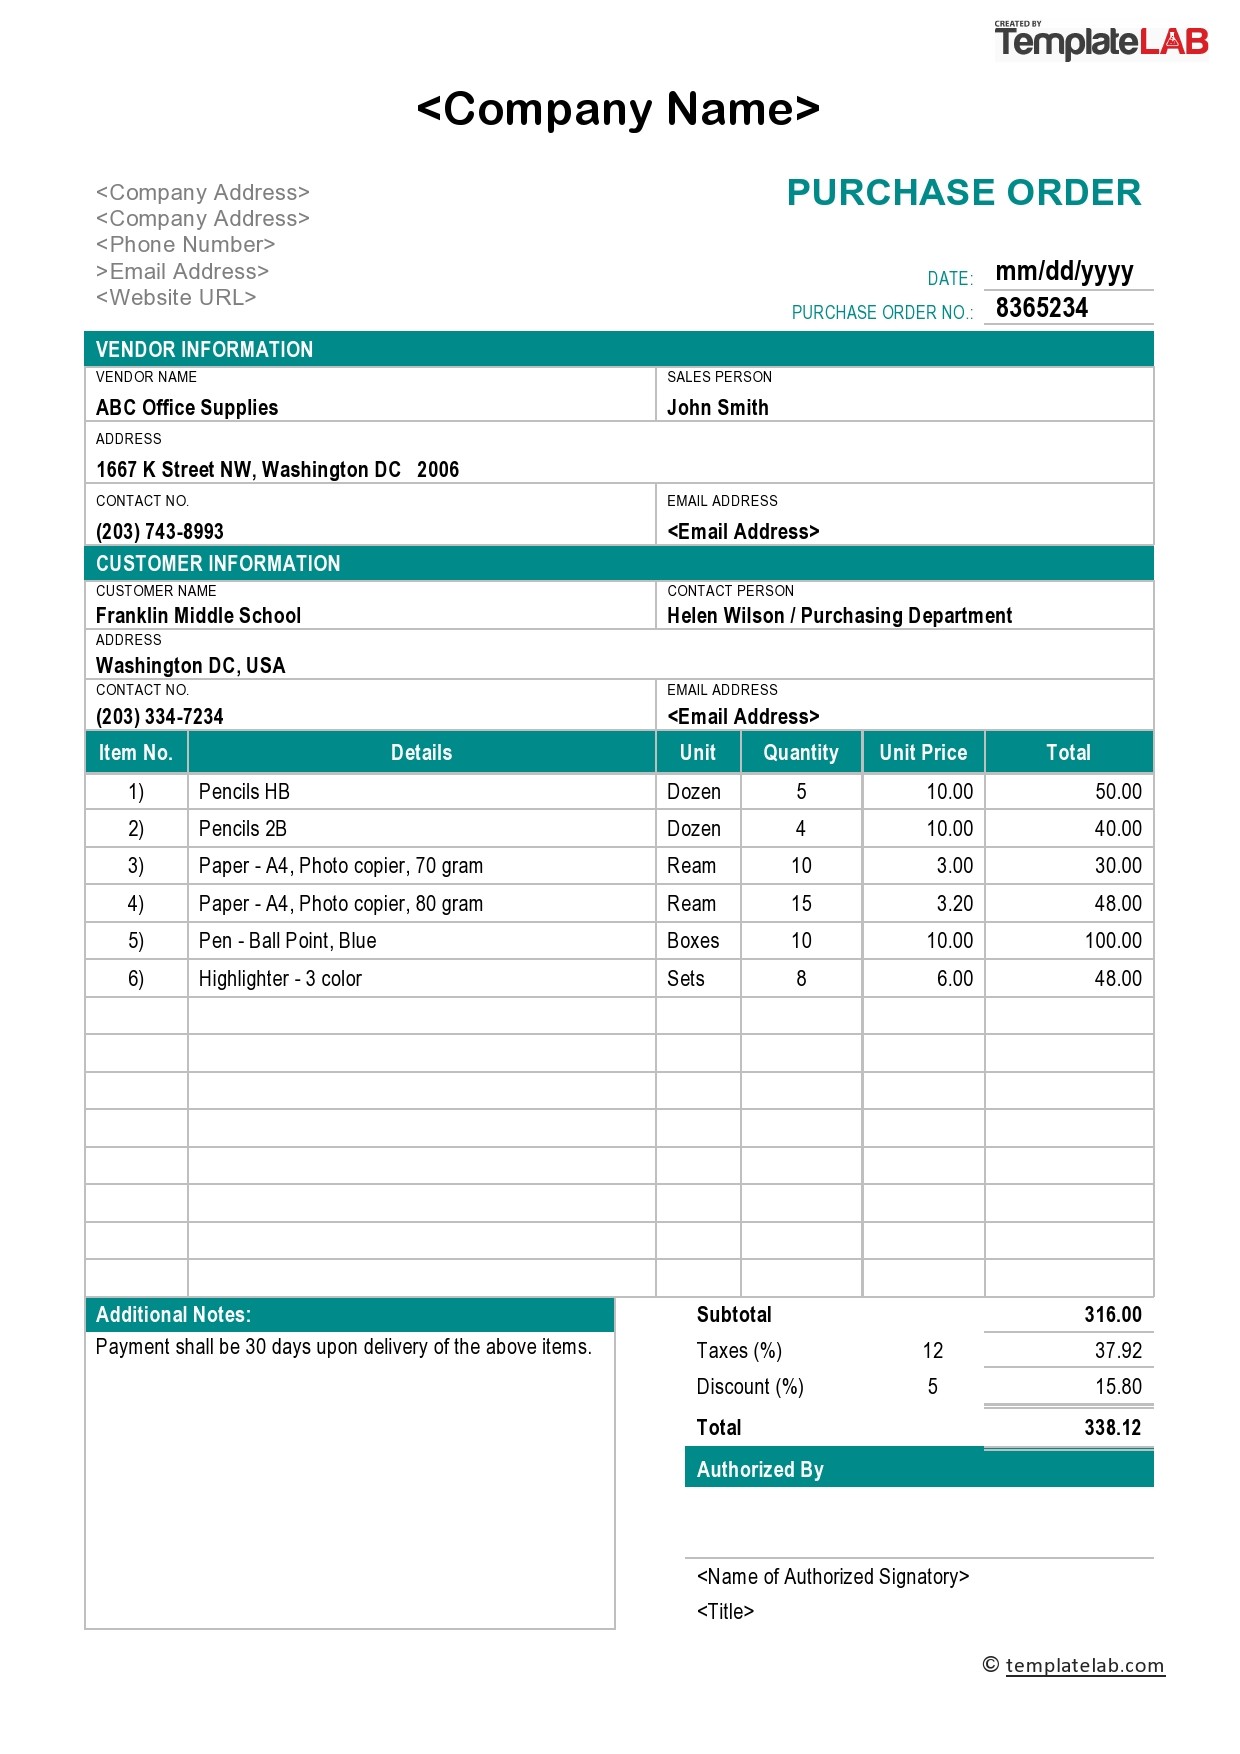 Purchase Order Template 02 TemplateLab